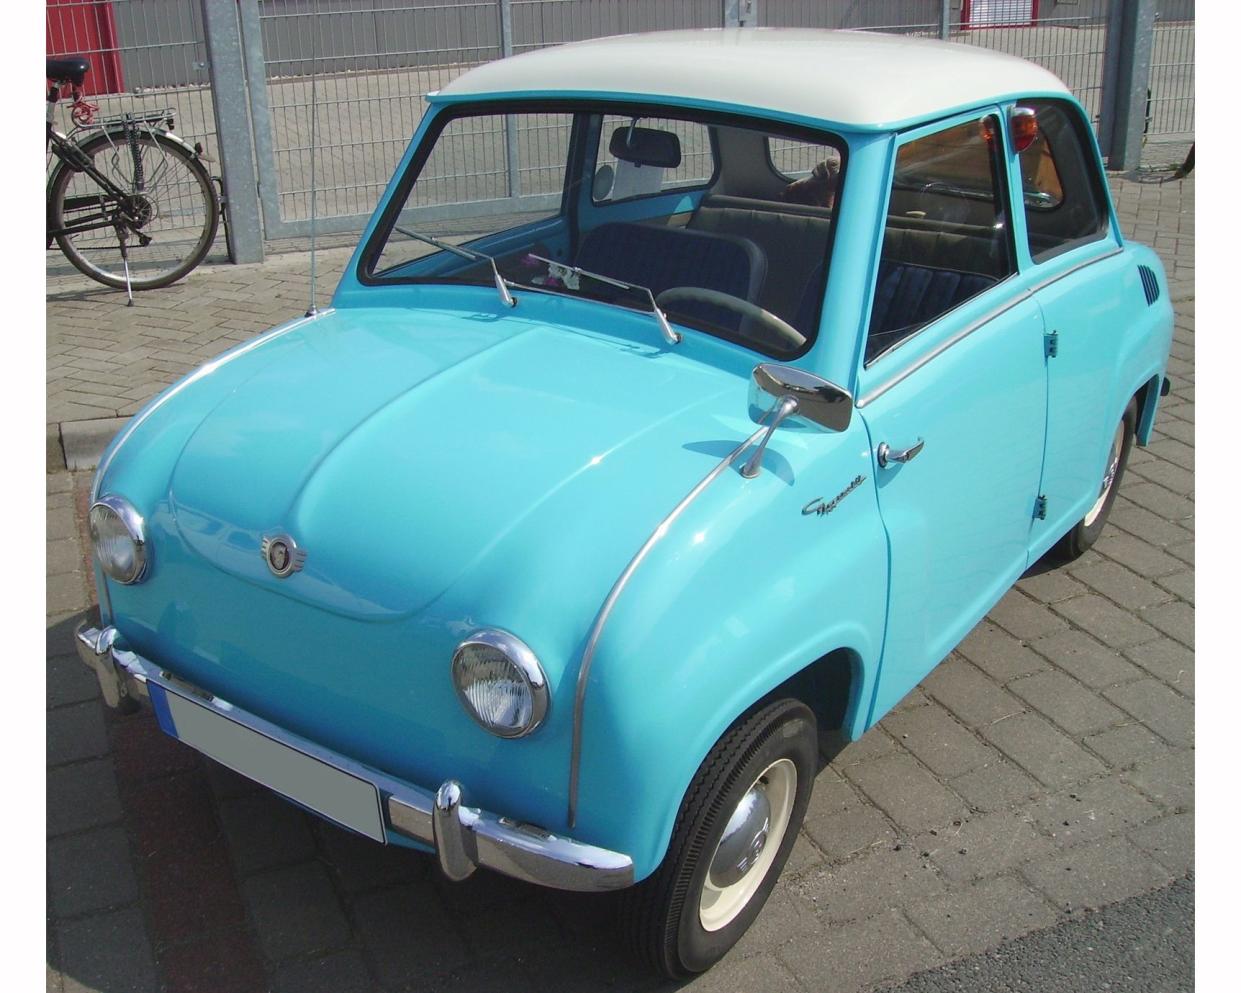 Goggomobil 250 in sky blue parked on pavement